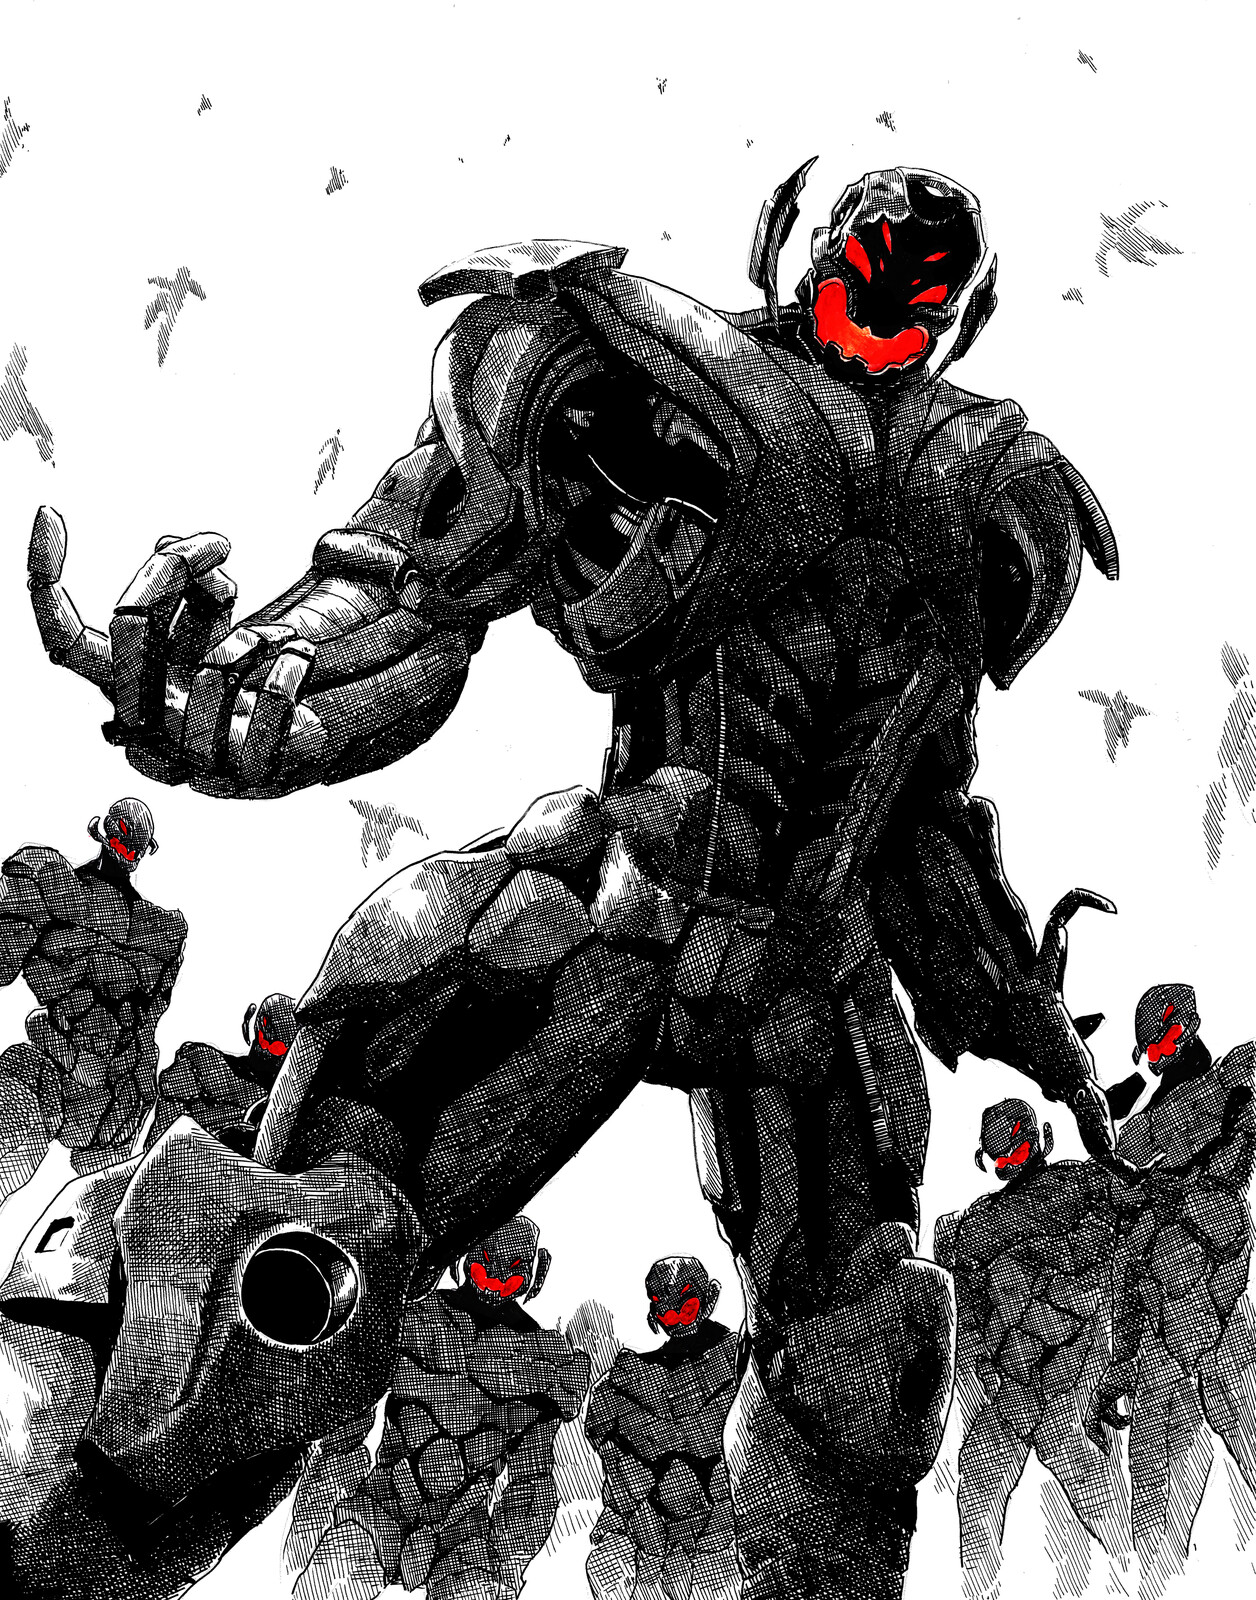 "They are no strings on me" Ultron Fanart